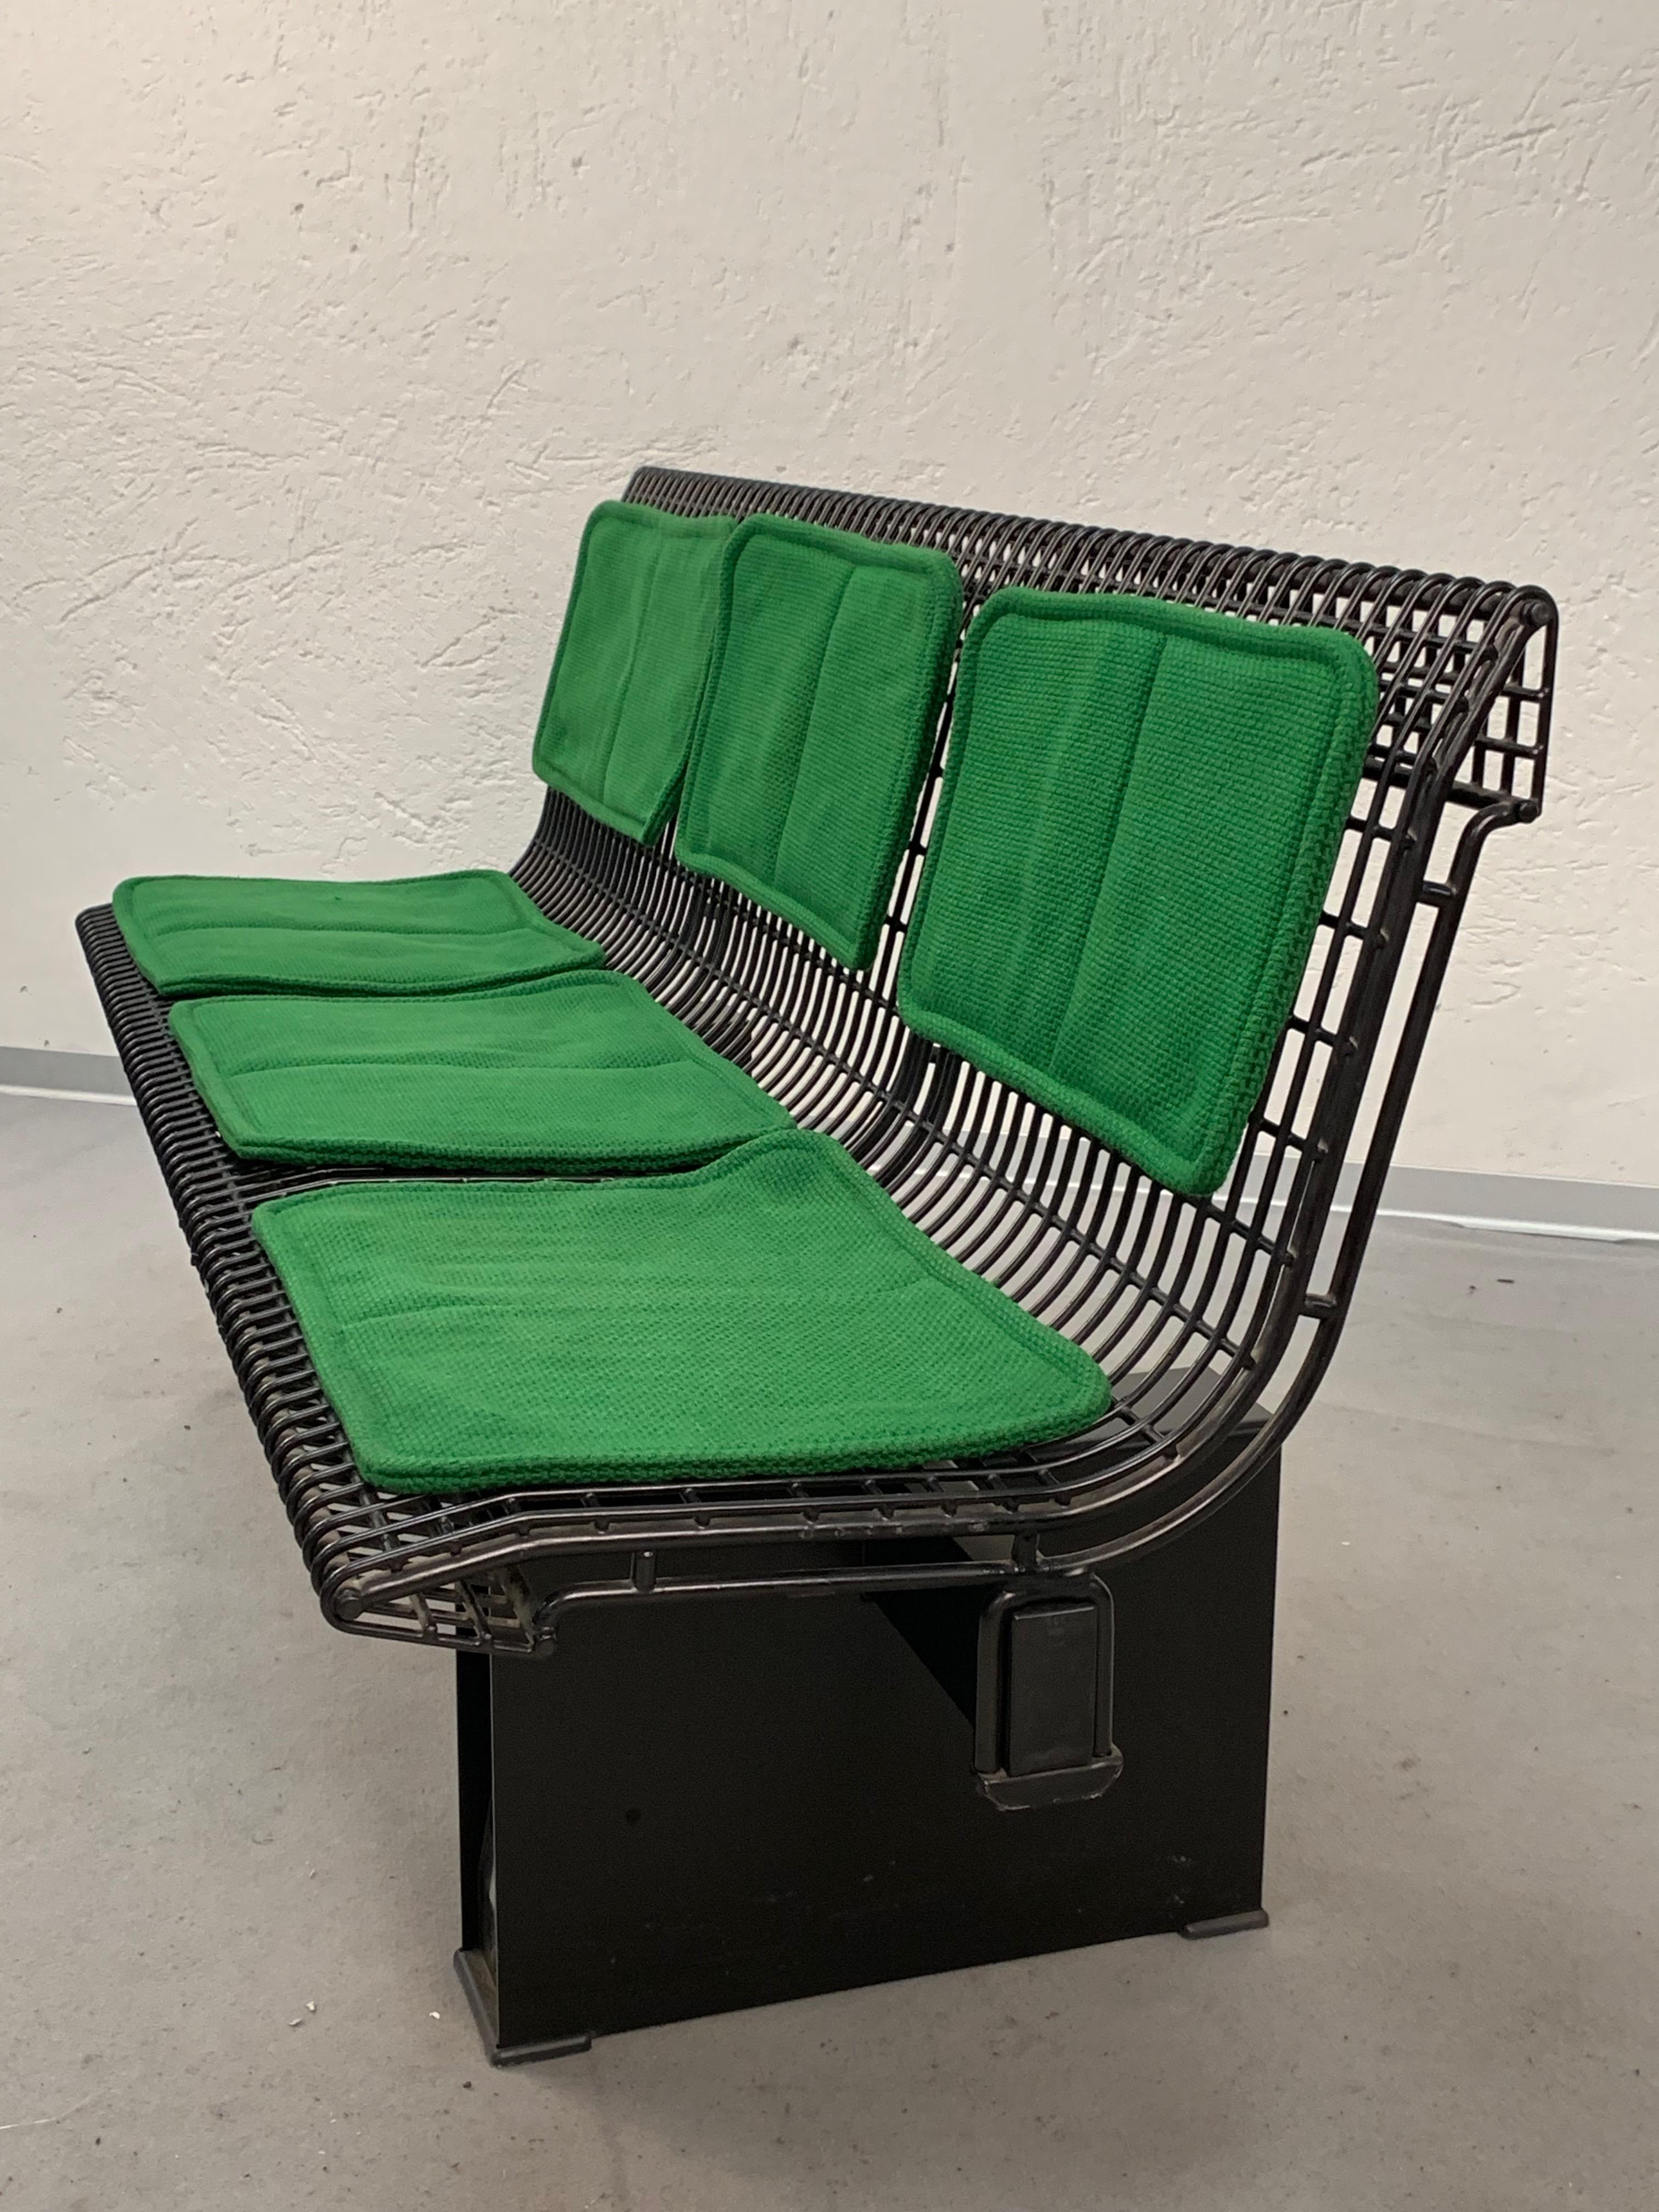 Marco Fantoni Green Fabric and Enameled Steel Italian Bench for Tecno, 1982 For Sale 5